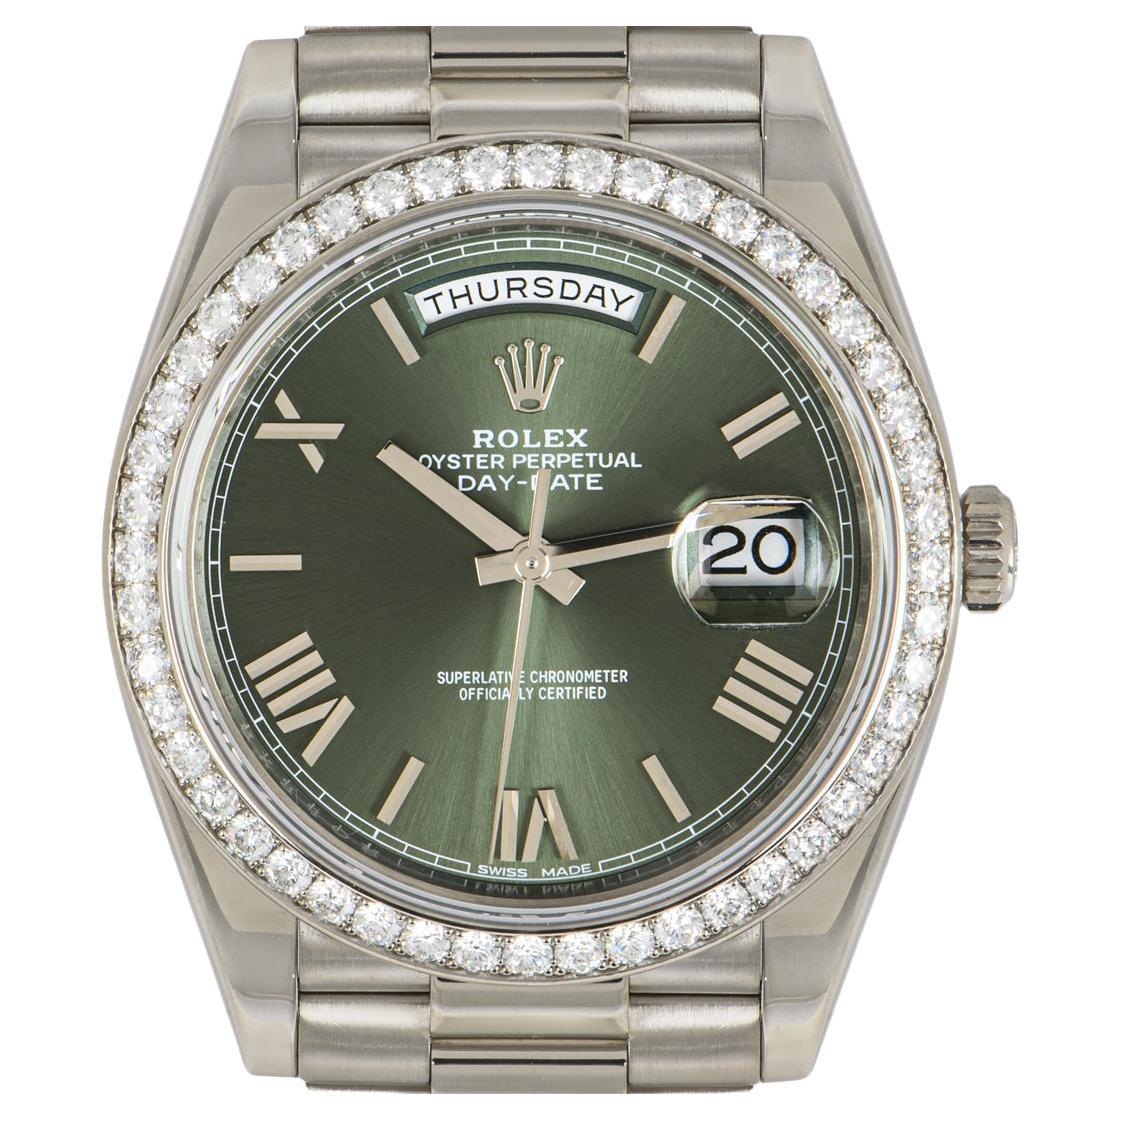 A men's white gold Day-Date 40 by Rolex. Featuring the highly sought after olive green dial with Roman numerals and bezel set with 48 round brilliant cut diamonds. The president bracelet and concealed folding Crownclasp are signature Day-Date